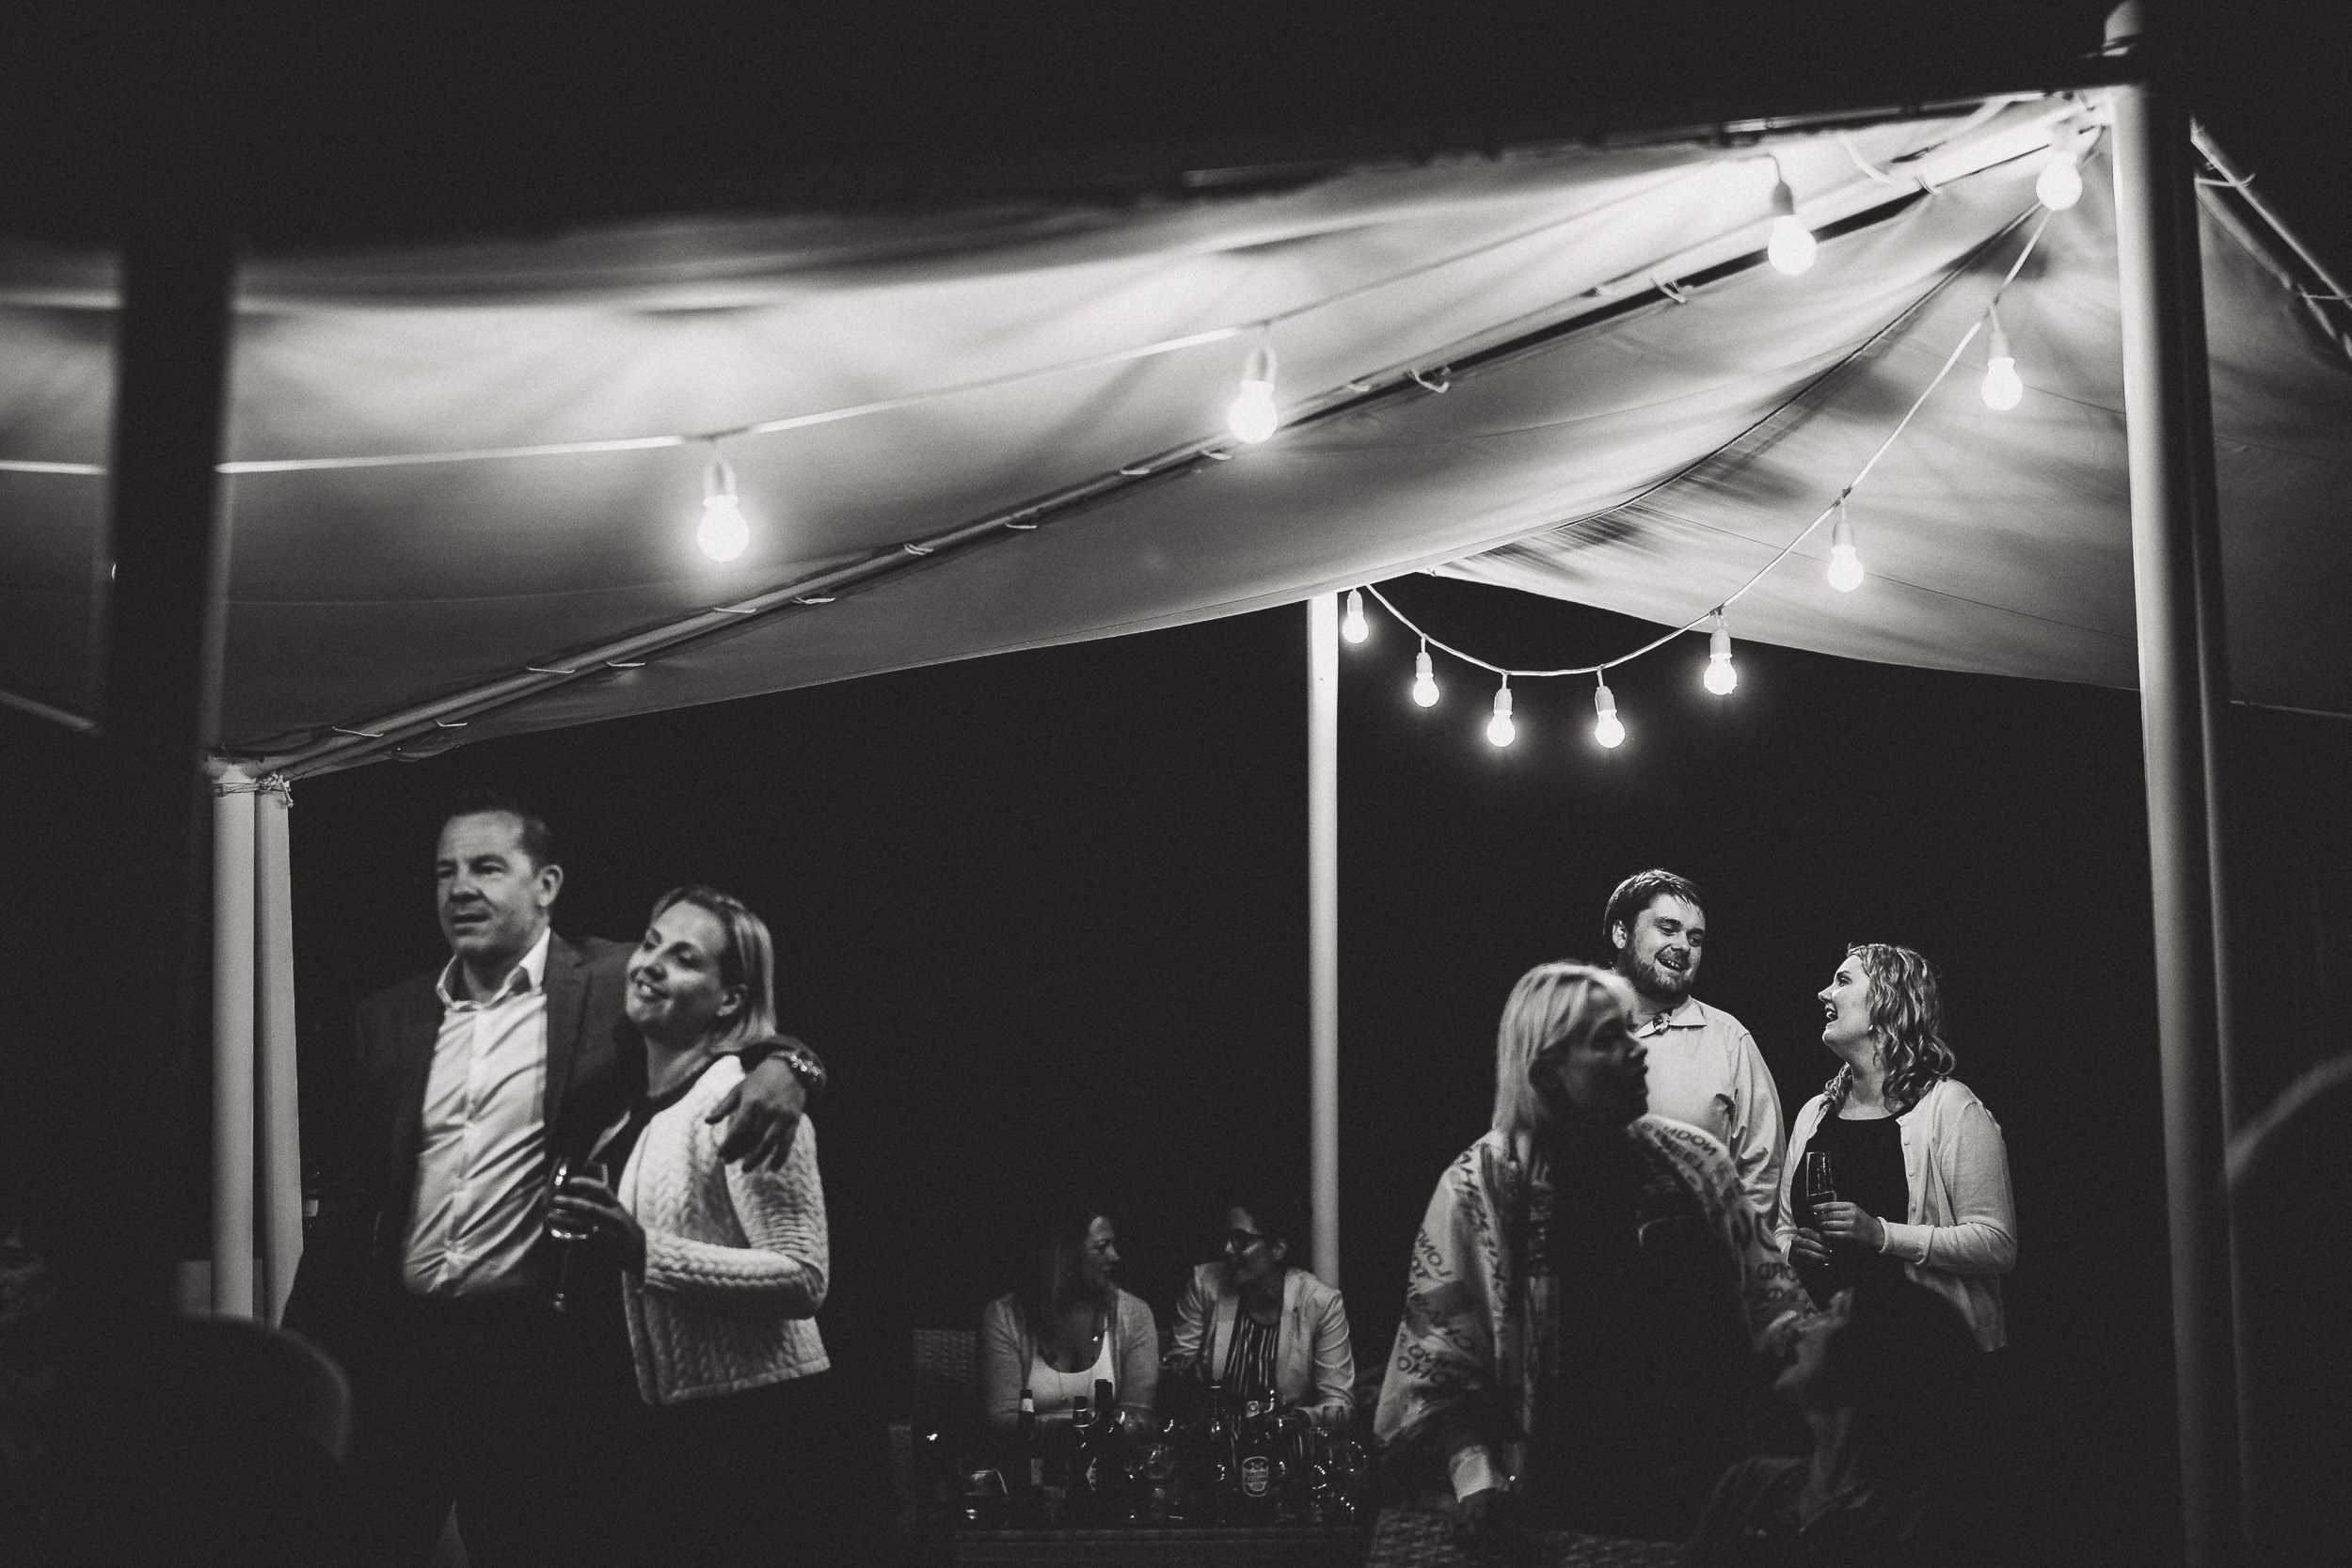 A wedding photographer capturing a group of people under a tent at night.